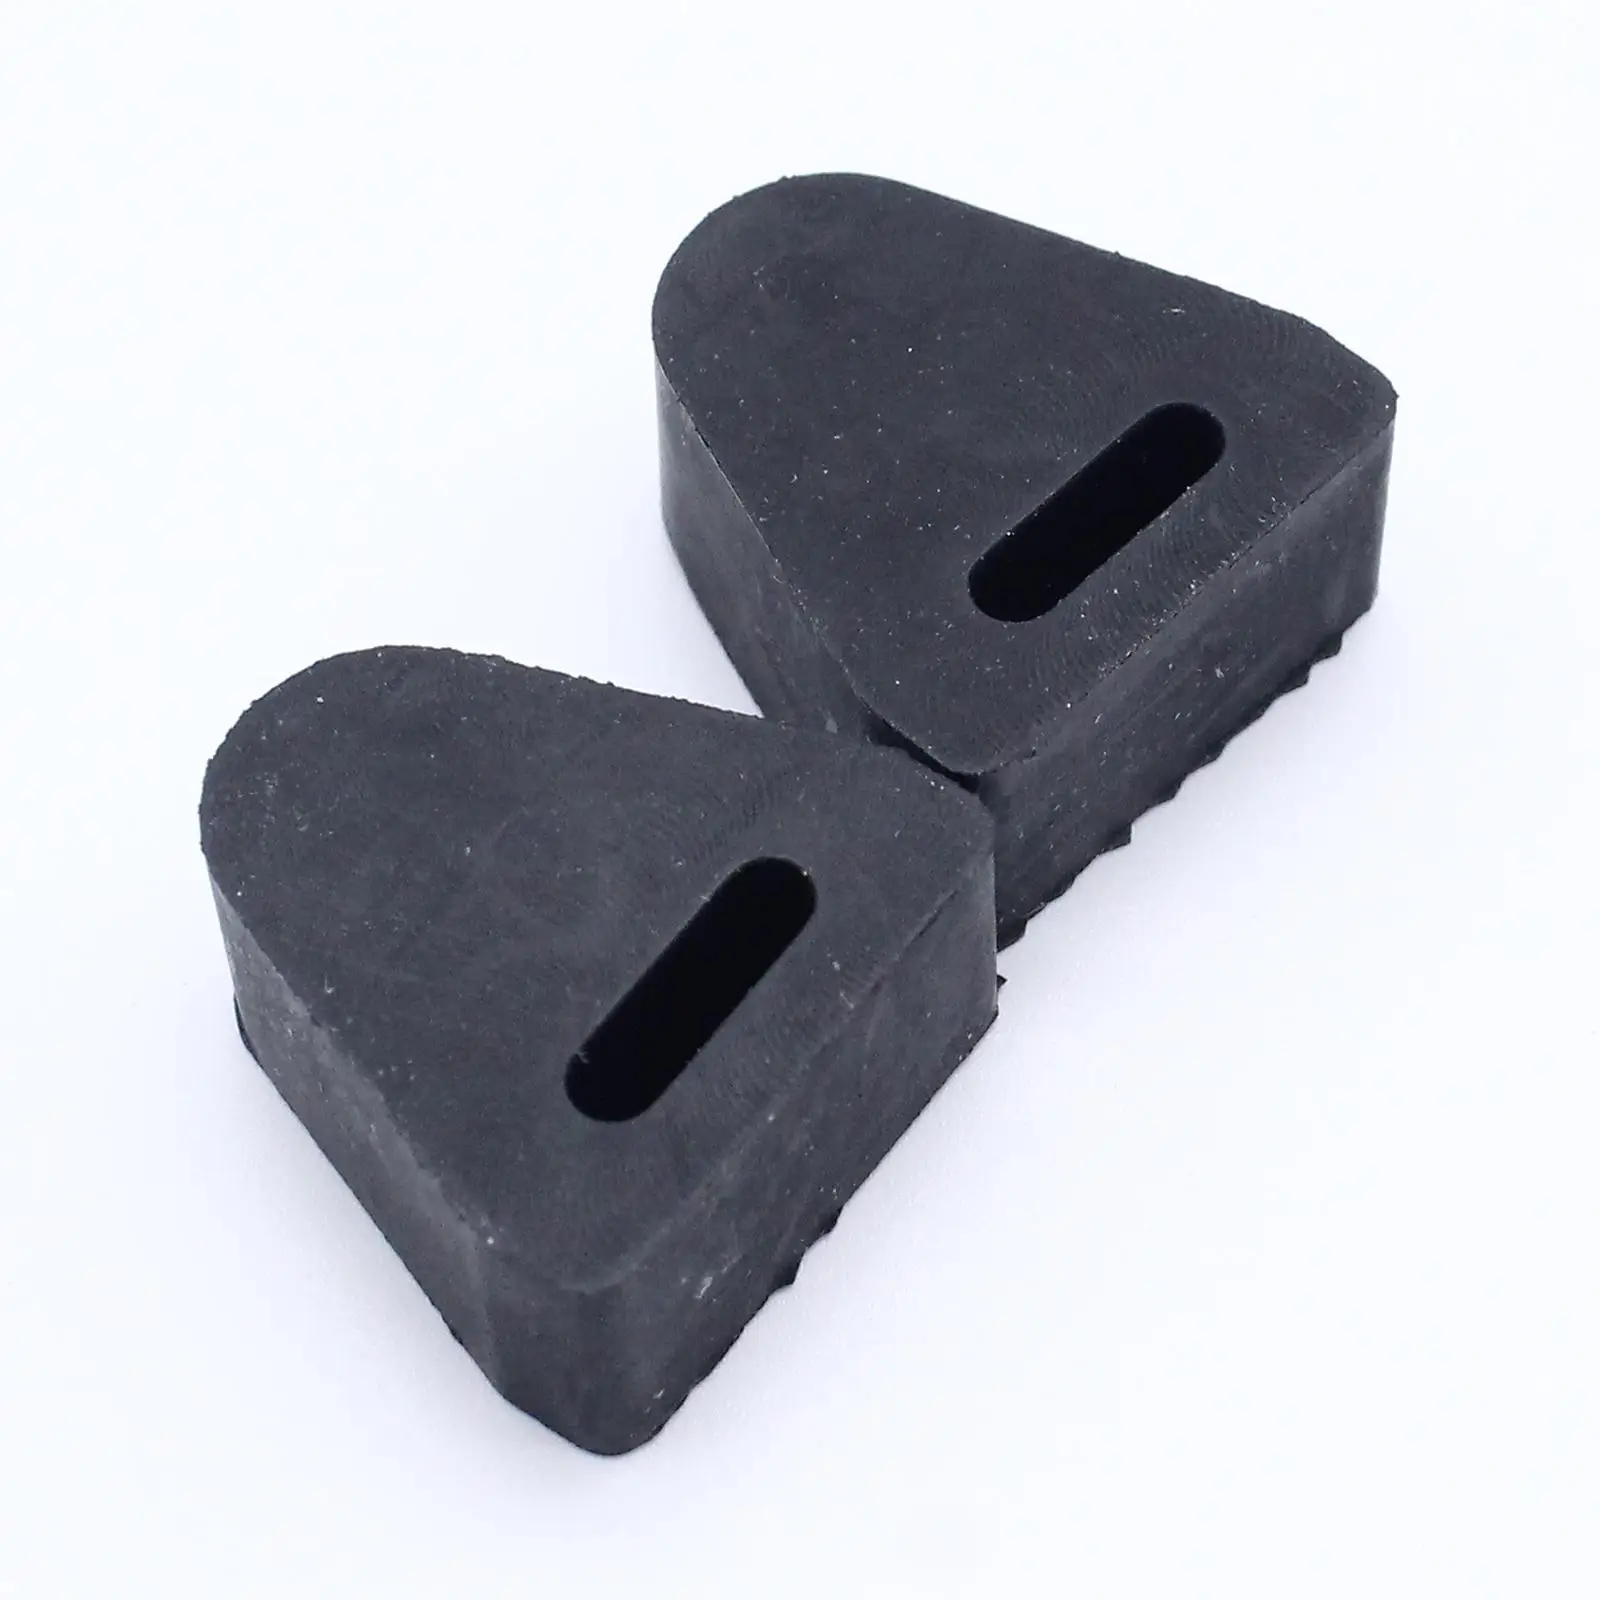 2x Vehicle Auto Tailgate Lock Rubber Stopper for